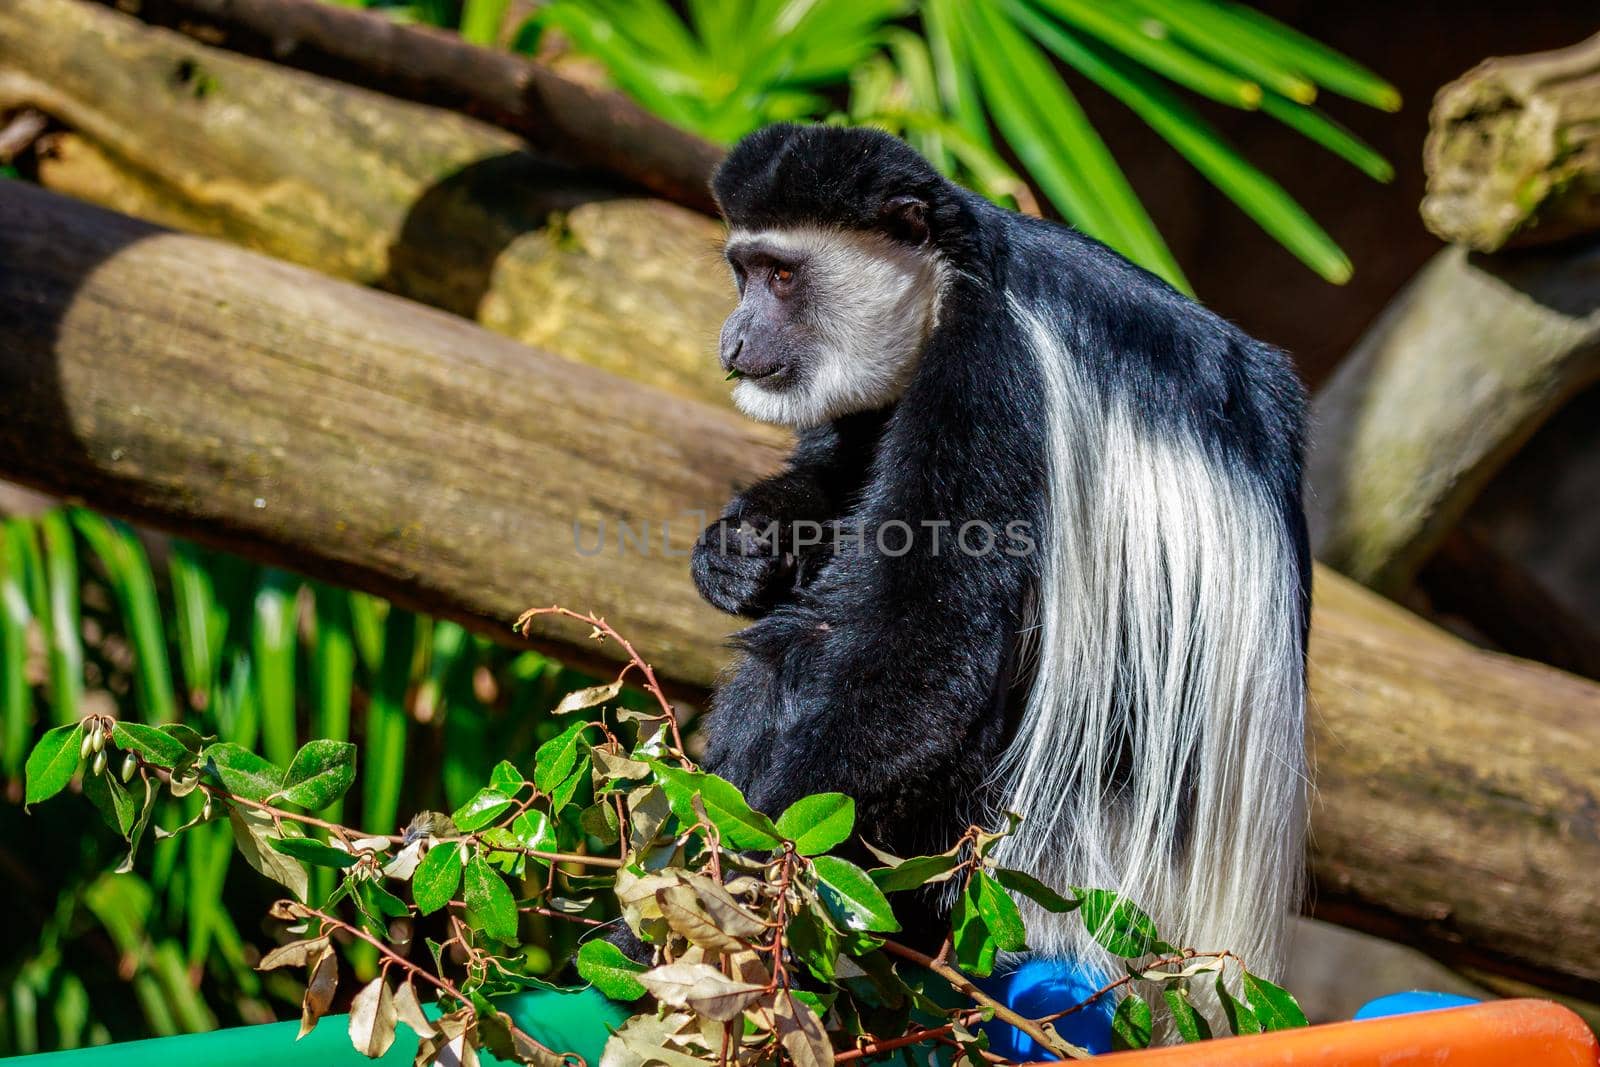 Colobus monkey with black and white fur.